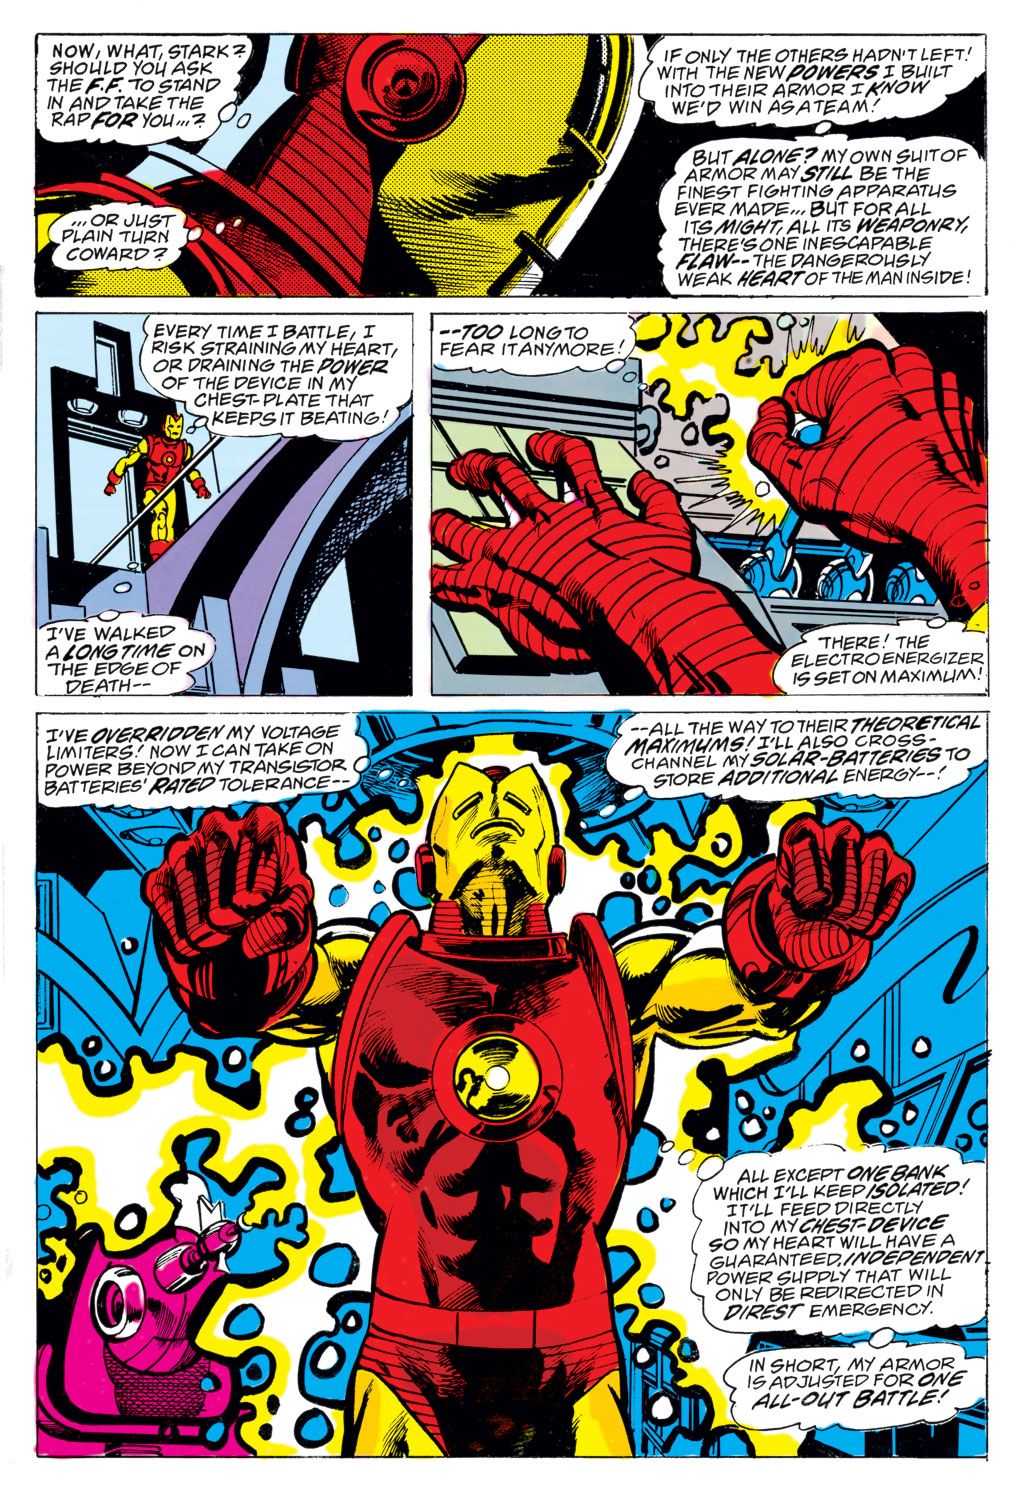 What If? (1977) issue 3 - The Avengers had never been - Page 15